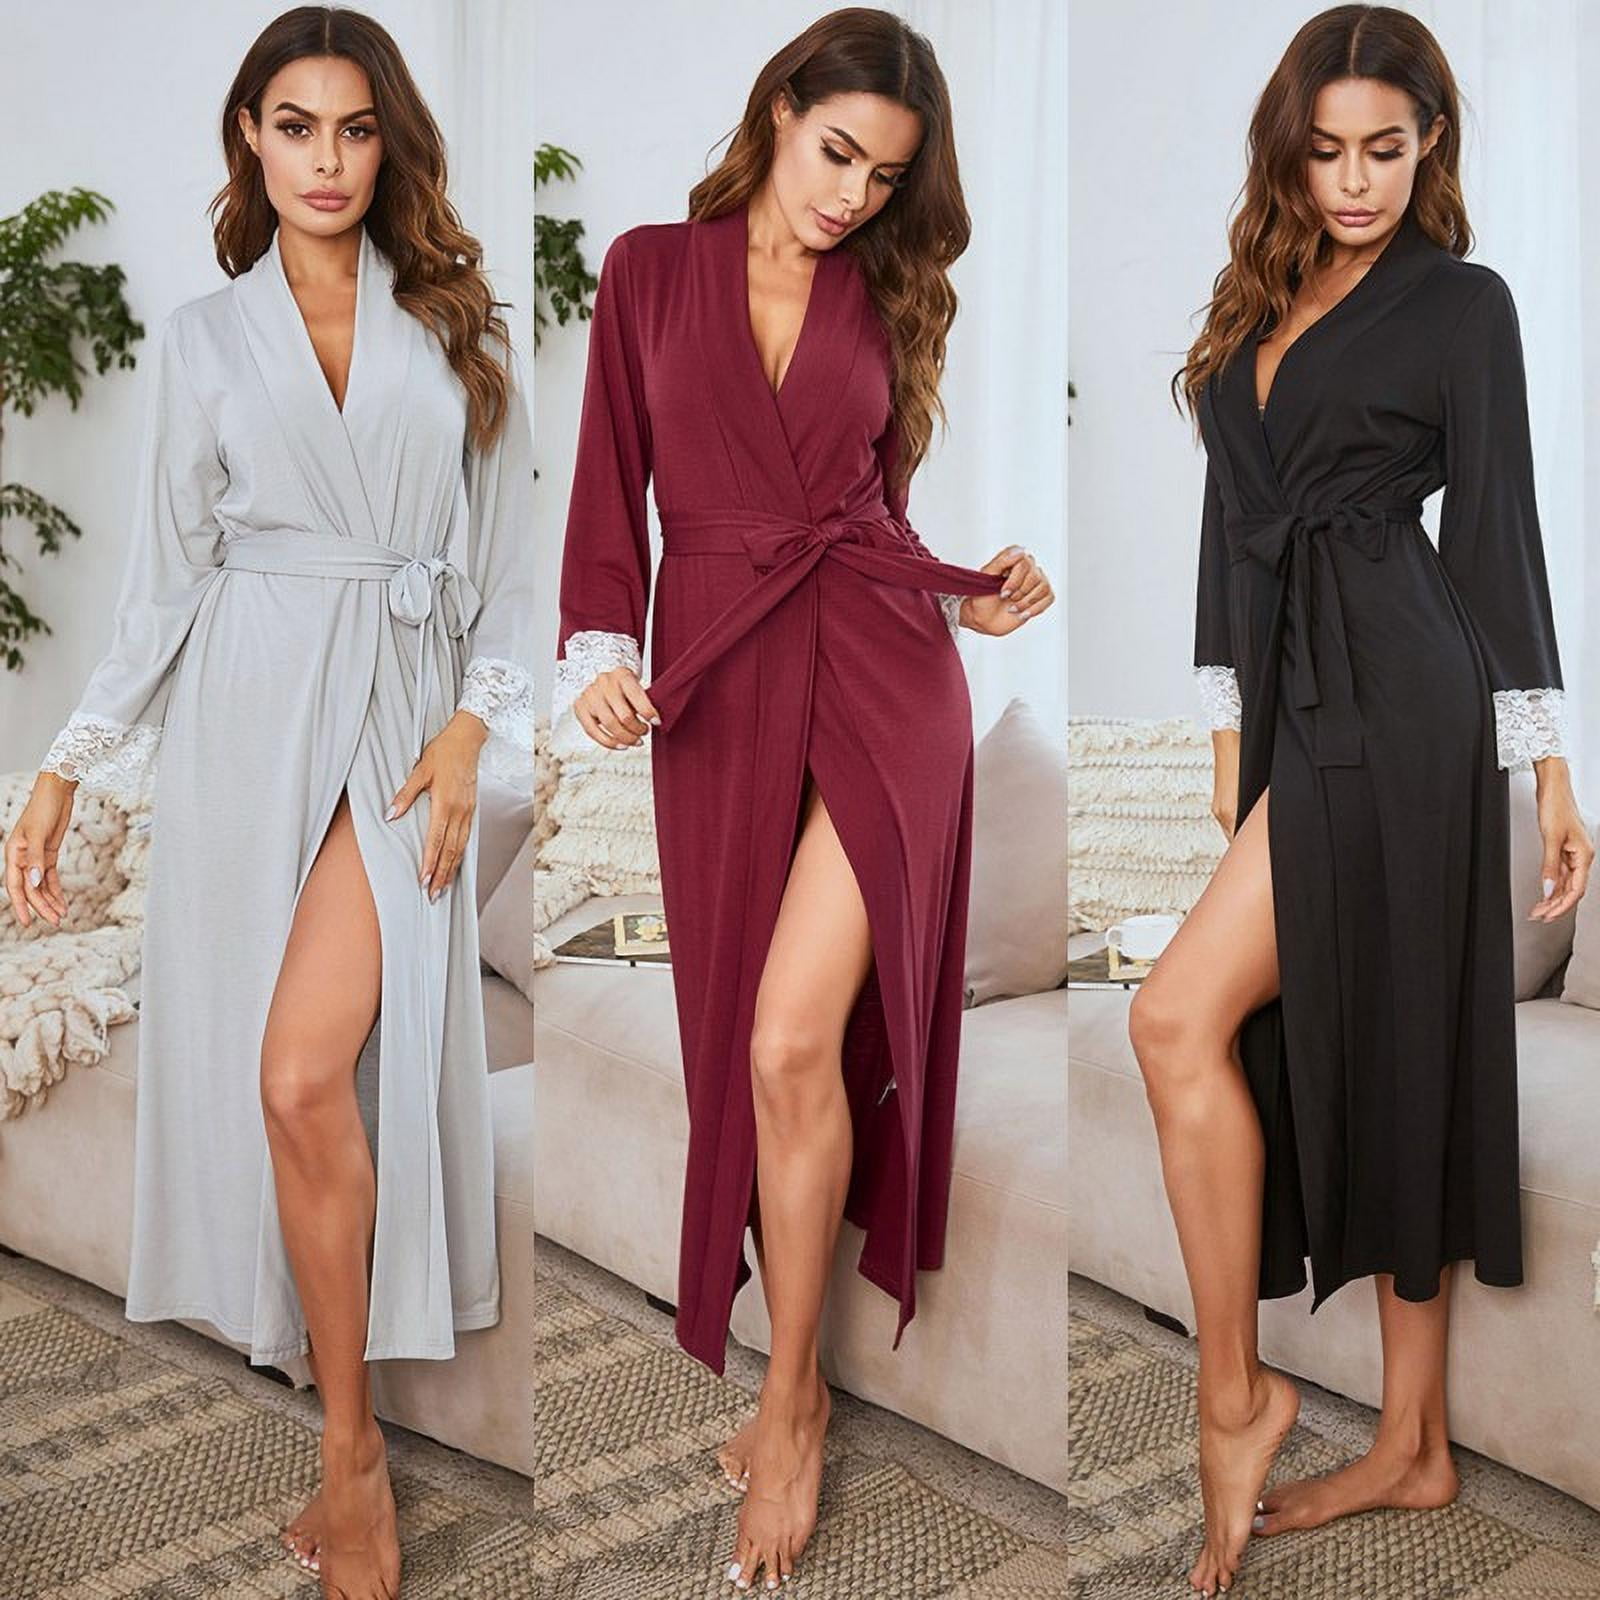 15 Best Lightweight Robes for Women: Cozy for Home or Travel